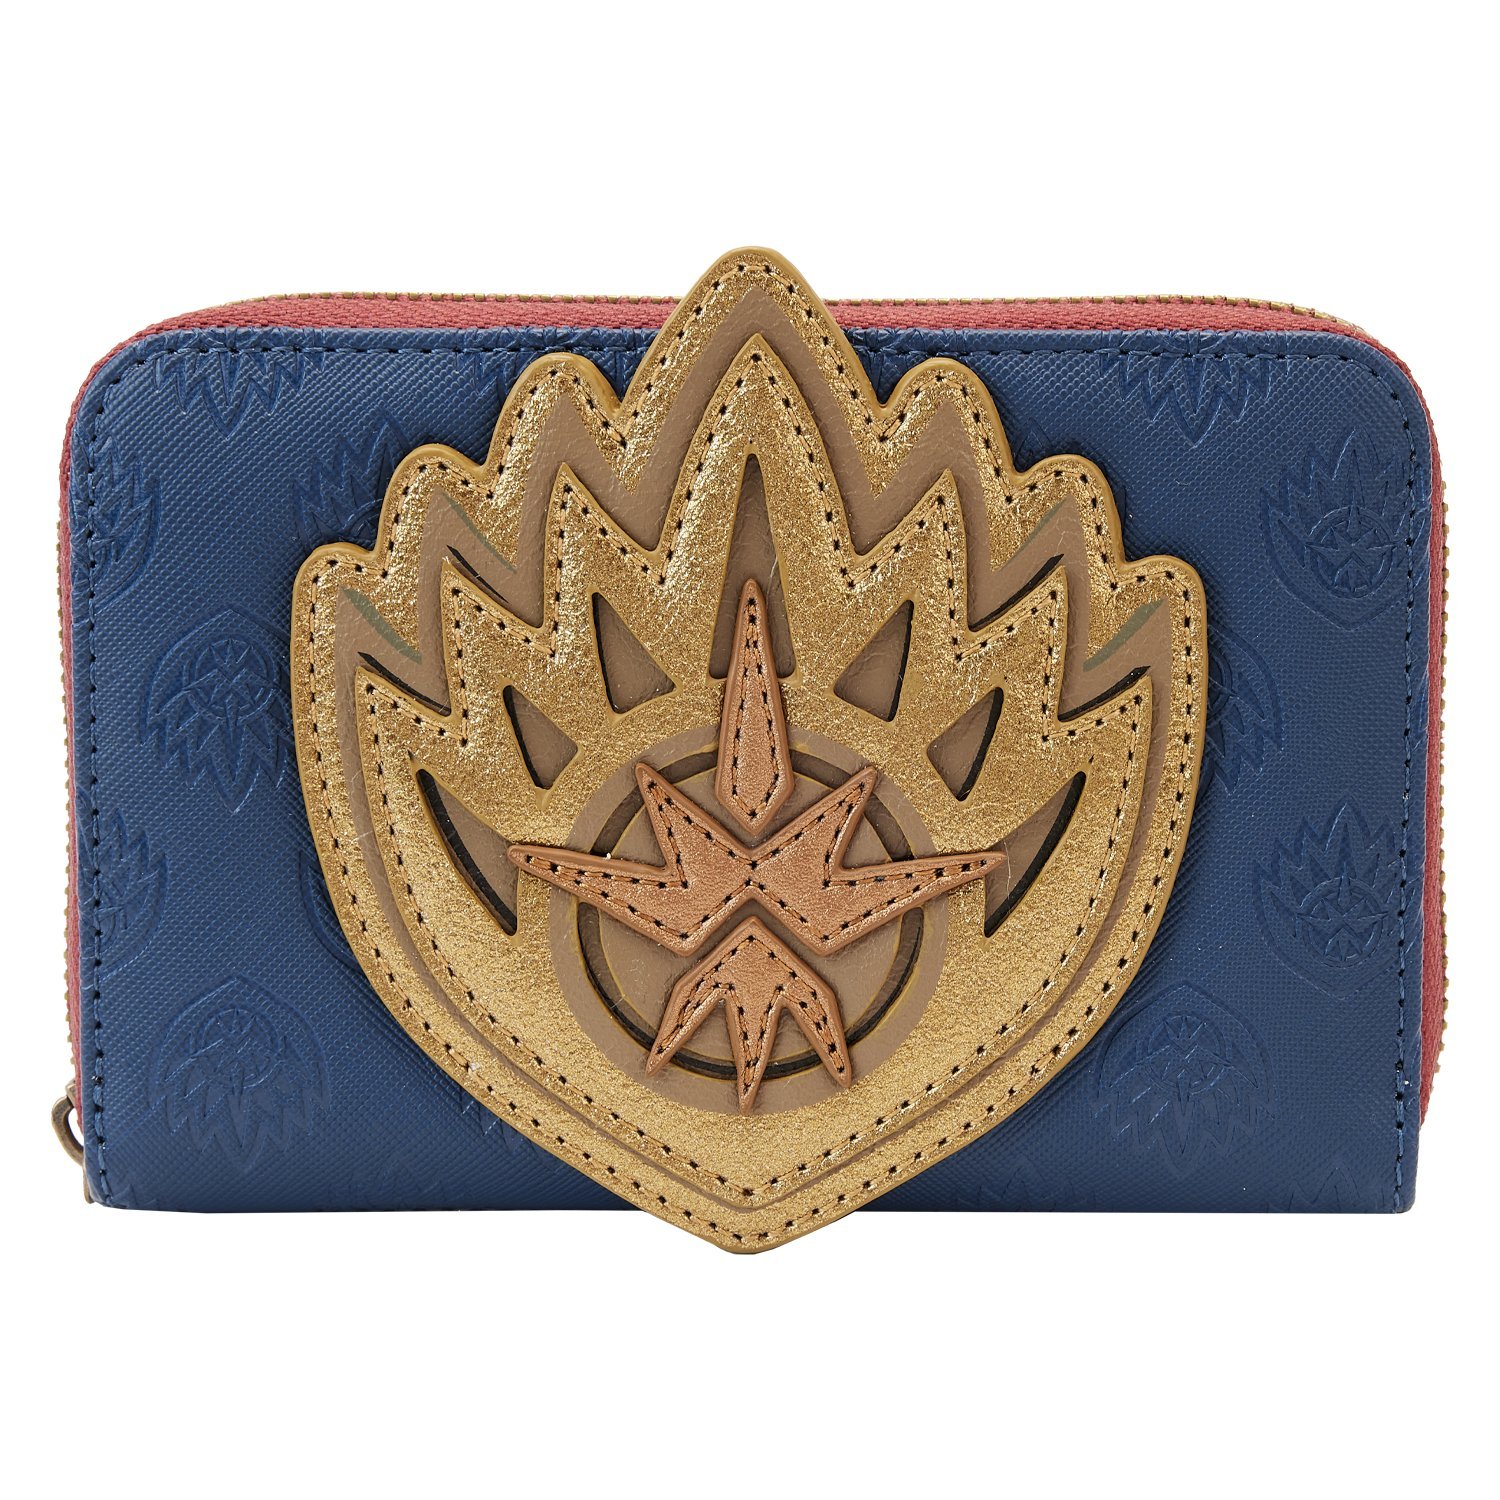 Guardians of the Galaxy Volume 3 Ravager Badge